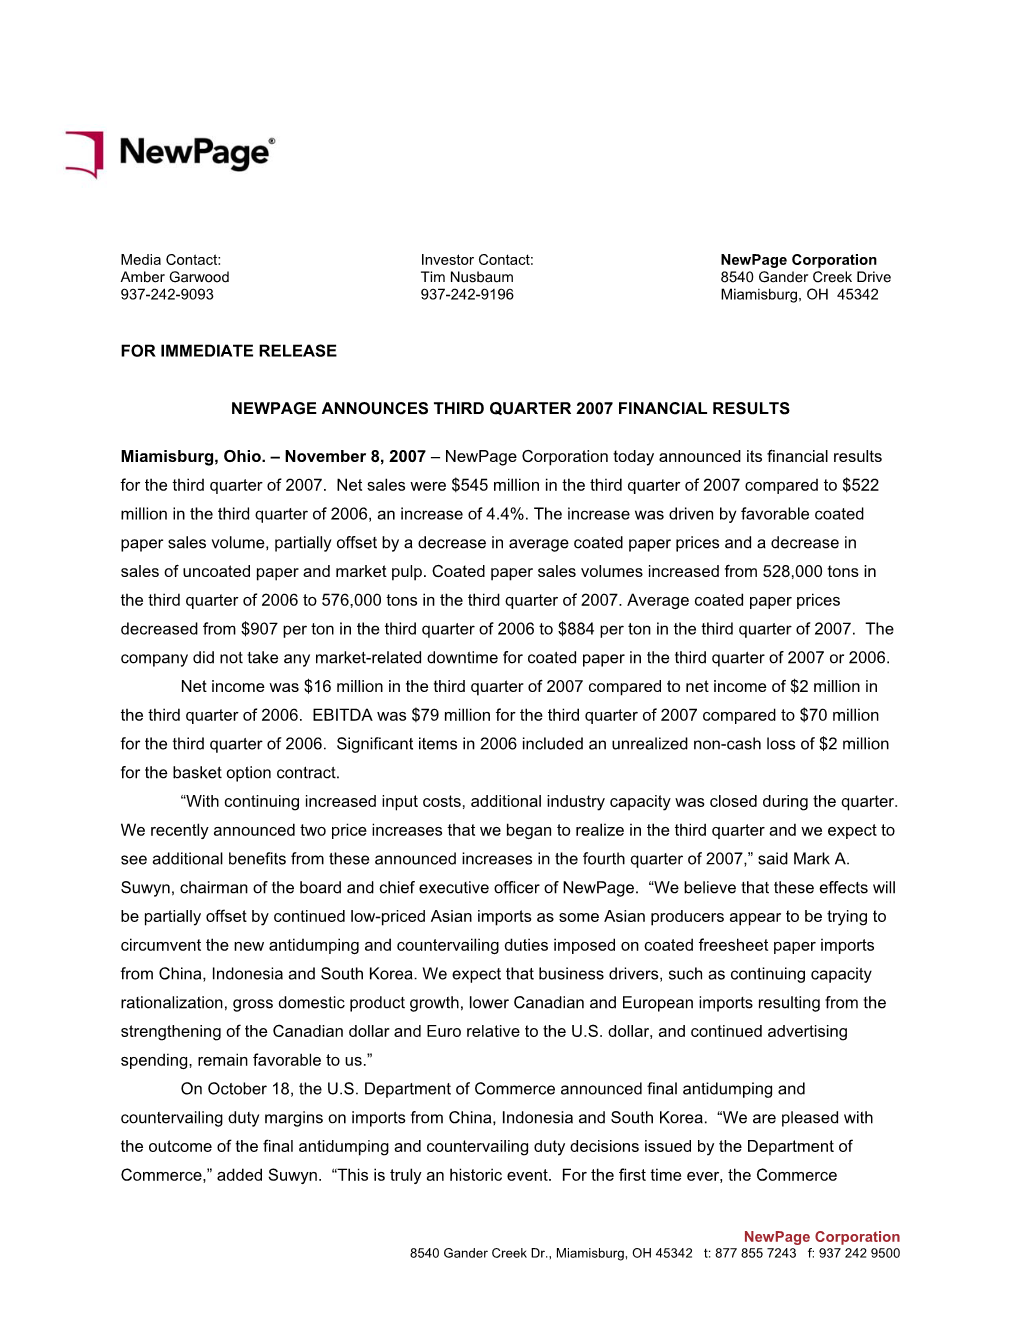 For Immediate Release Newpage Announces Third